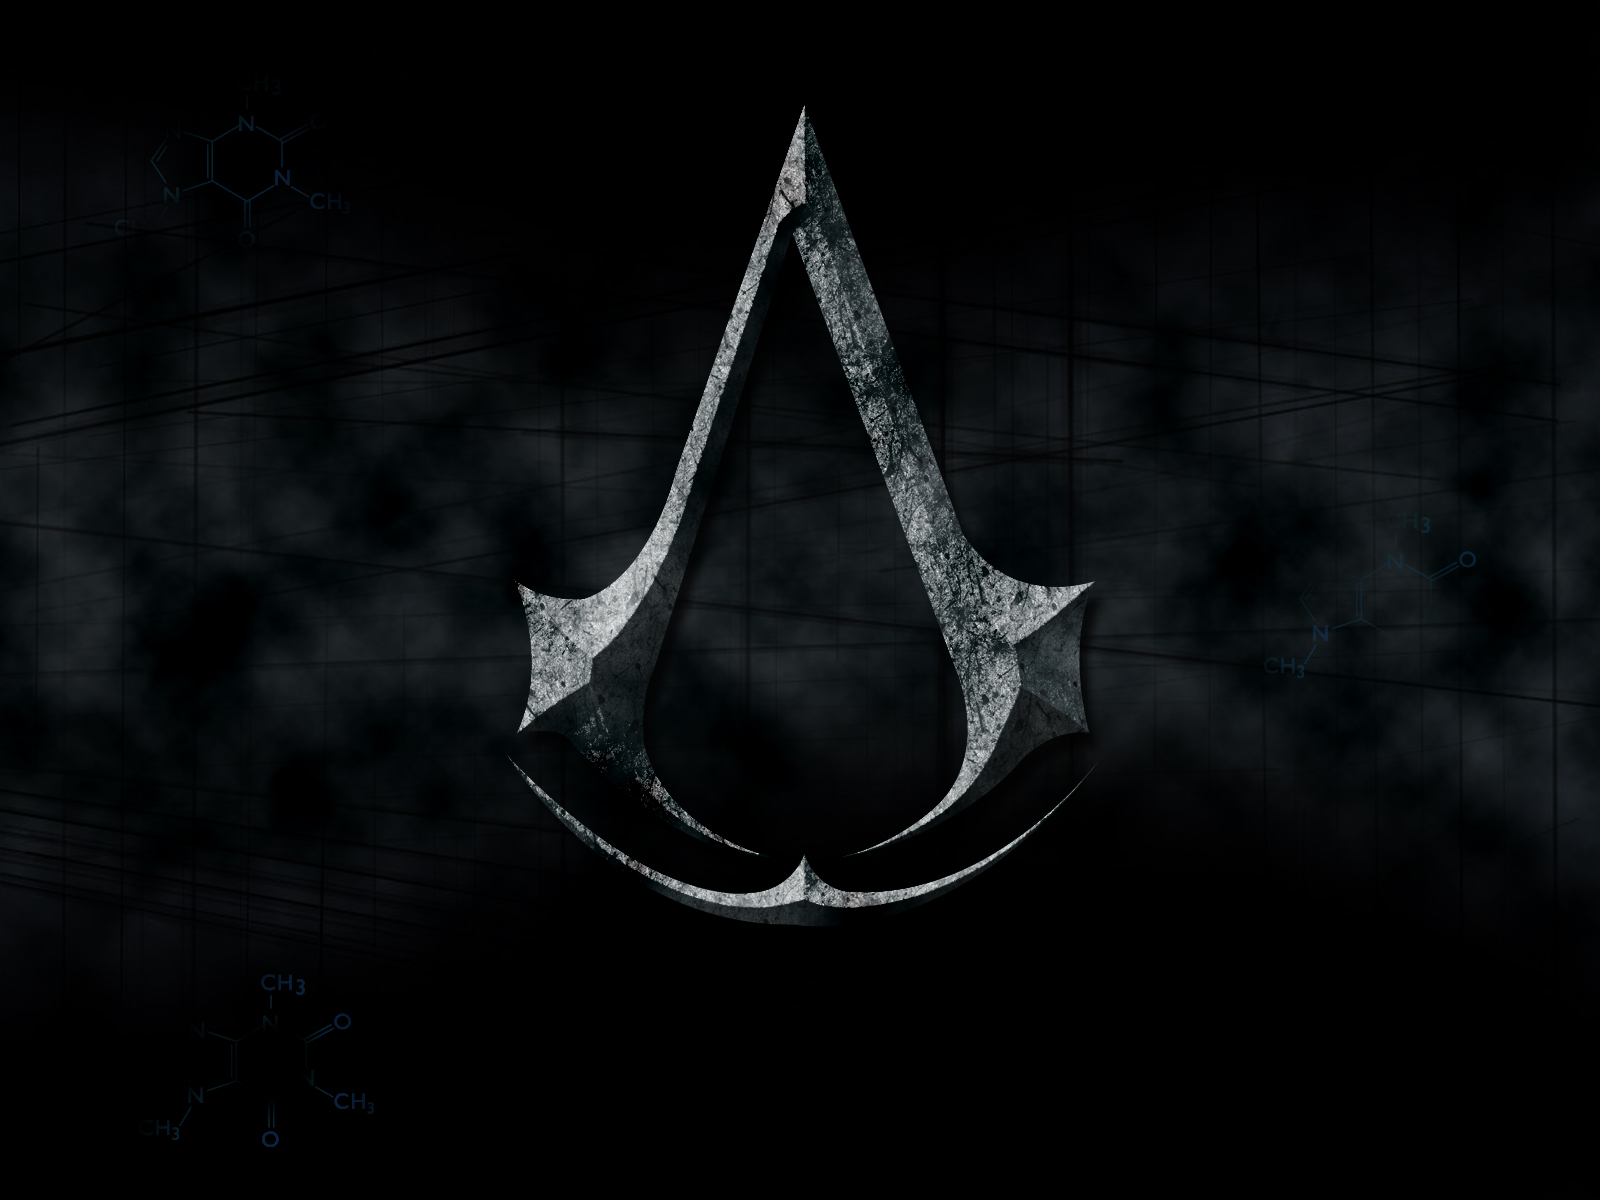 assassin-creed-wallpapers-download-free-19.jpg